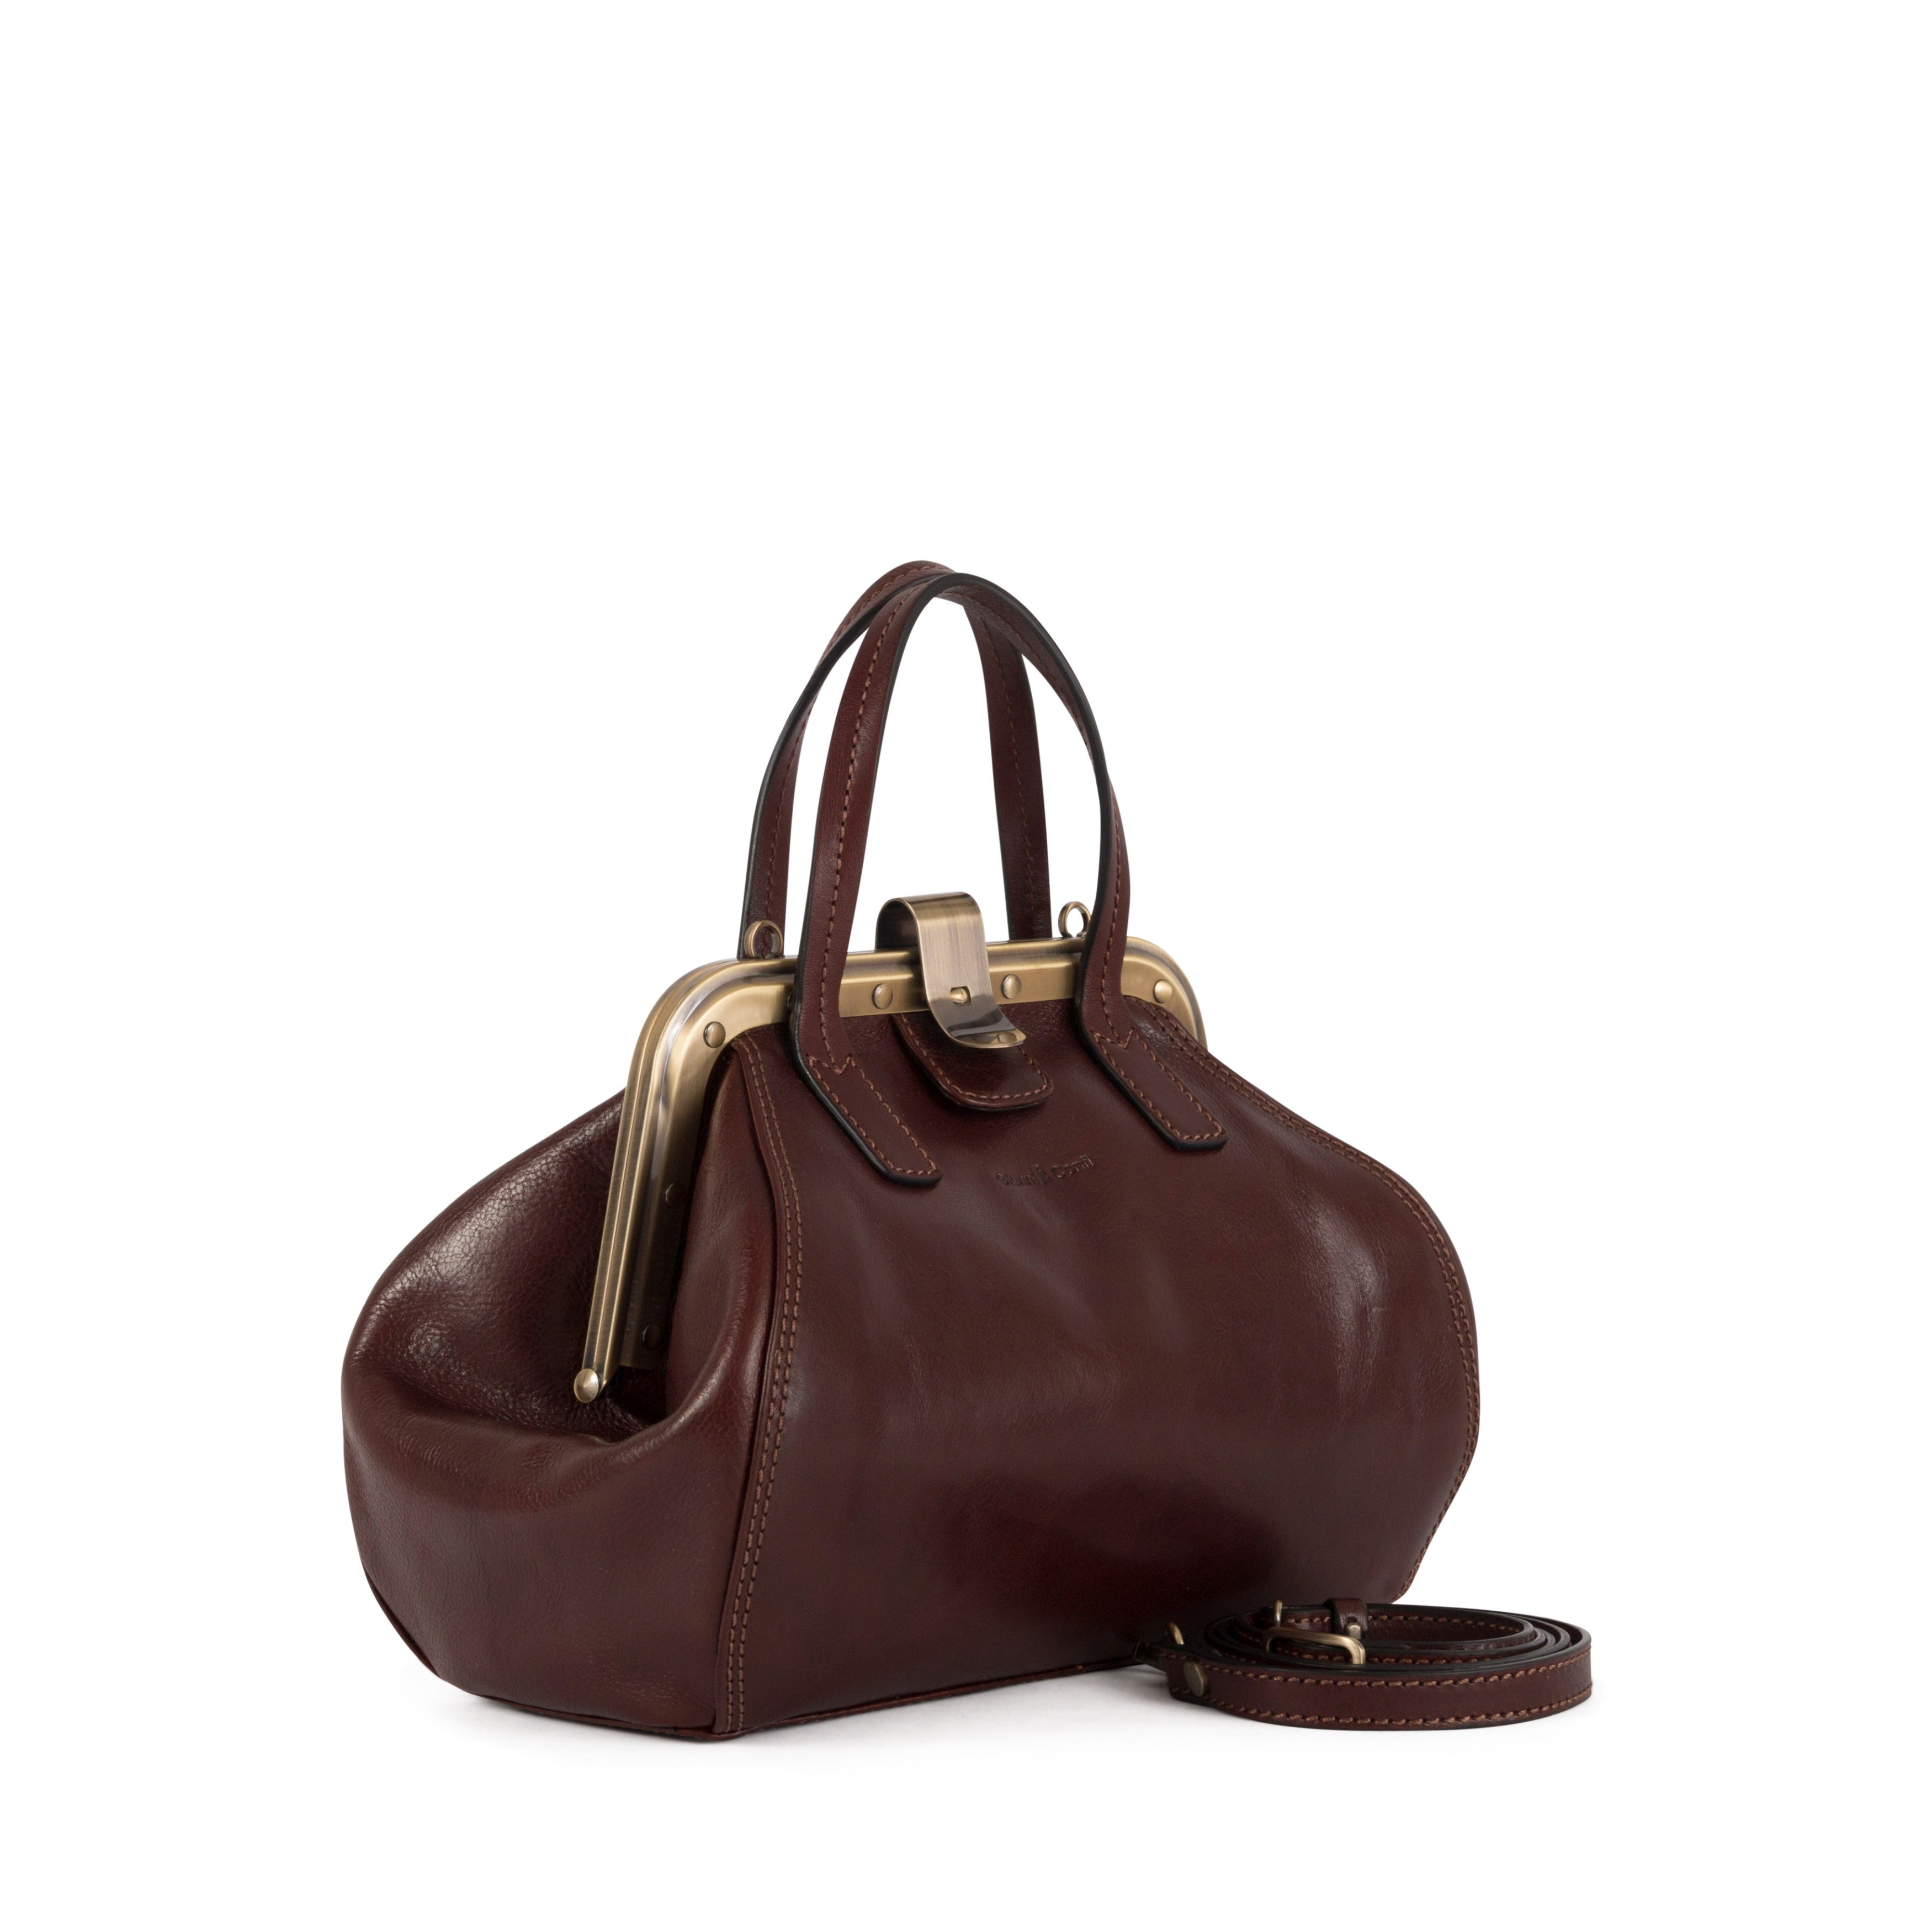 Gianni Conti Erica Top Handle Bag - Vegetable-Tanned Leather